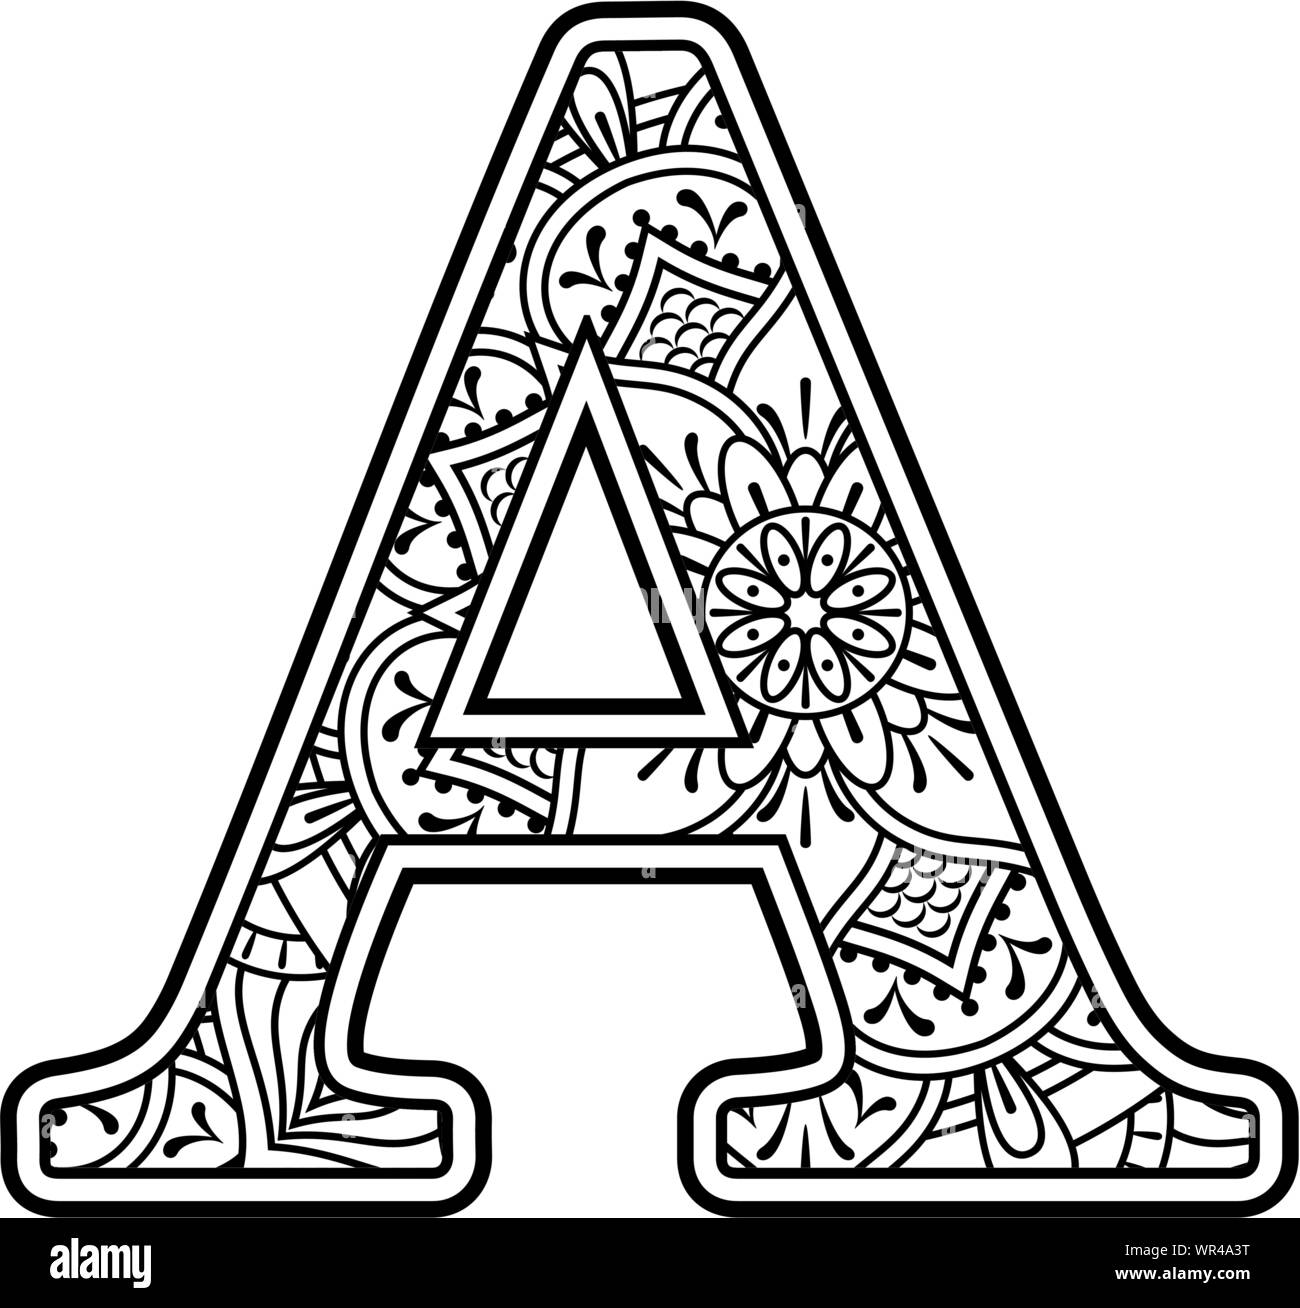 initial a in black and white with doodle ornaments and design elements ...